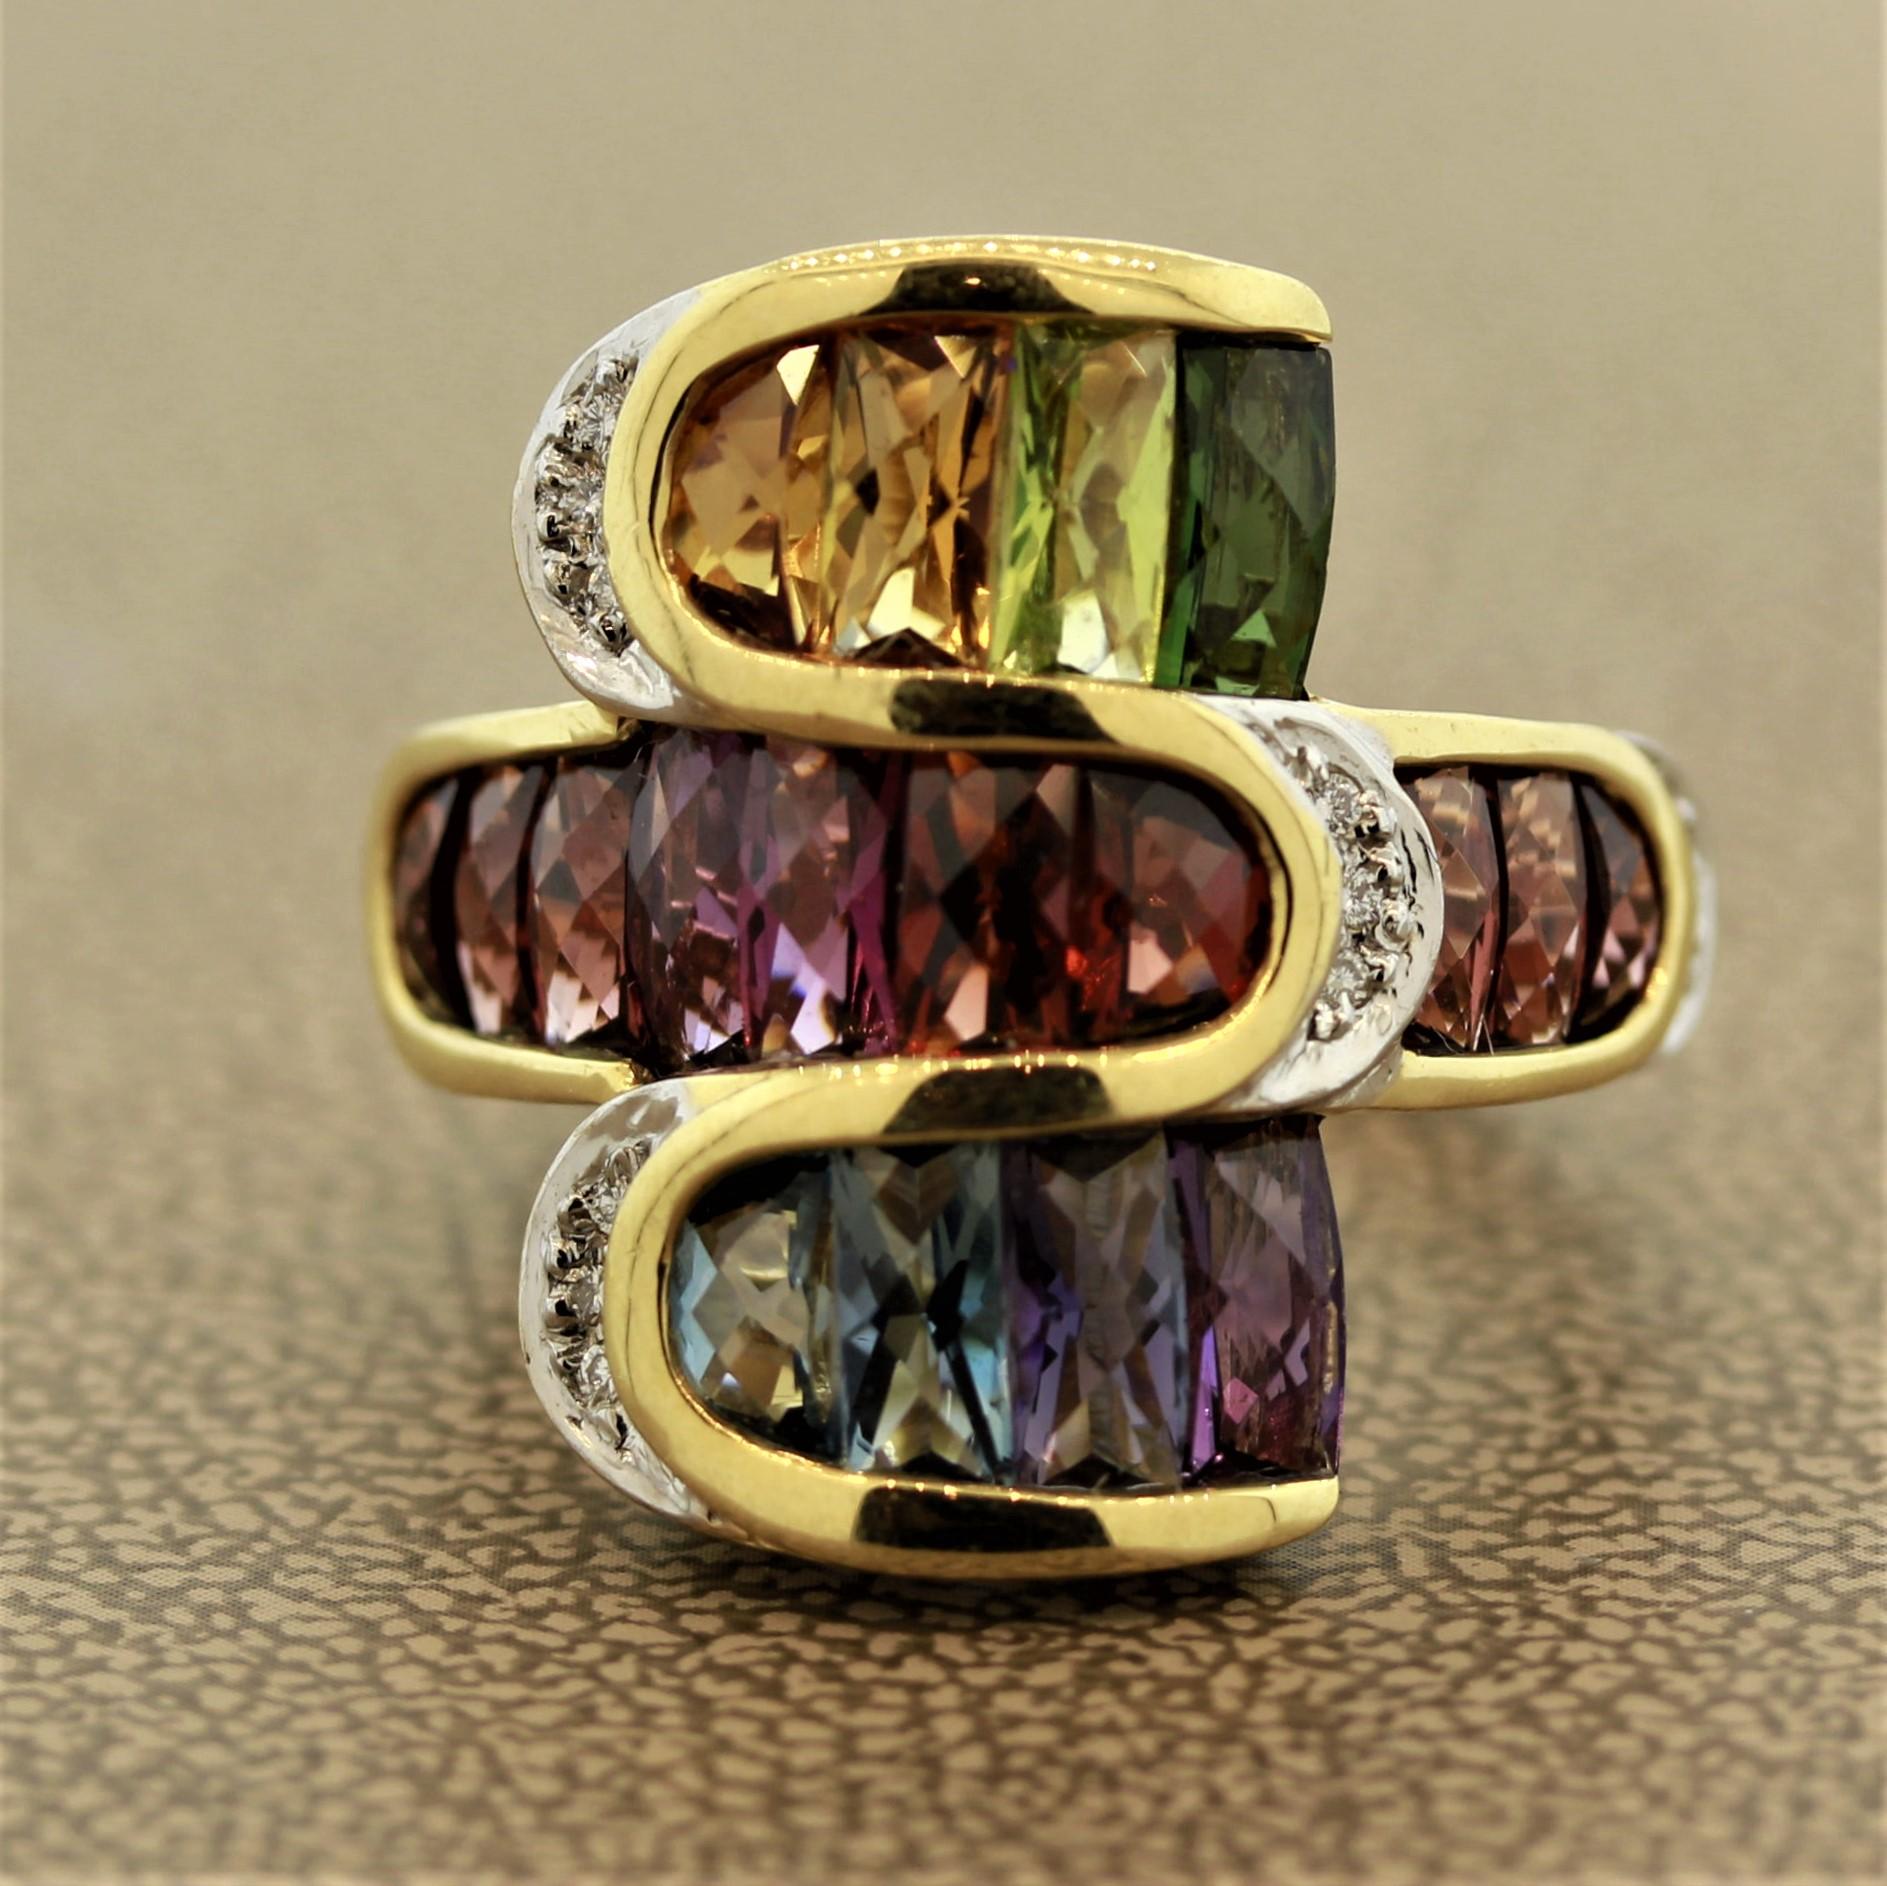 A stunning ring by Italian designer Bellarri. This piece features a total of 7.08 carats of multi-colored natural gemstones which include amethyst, topaz, tourmaline, citrine, garnet, and peridot: a rainbow of colors! The colored stones are accented